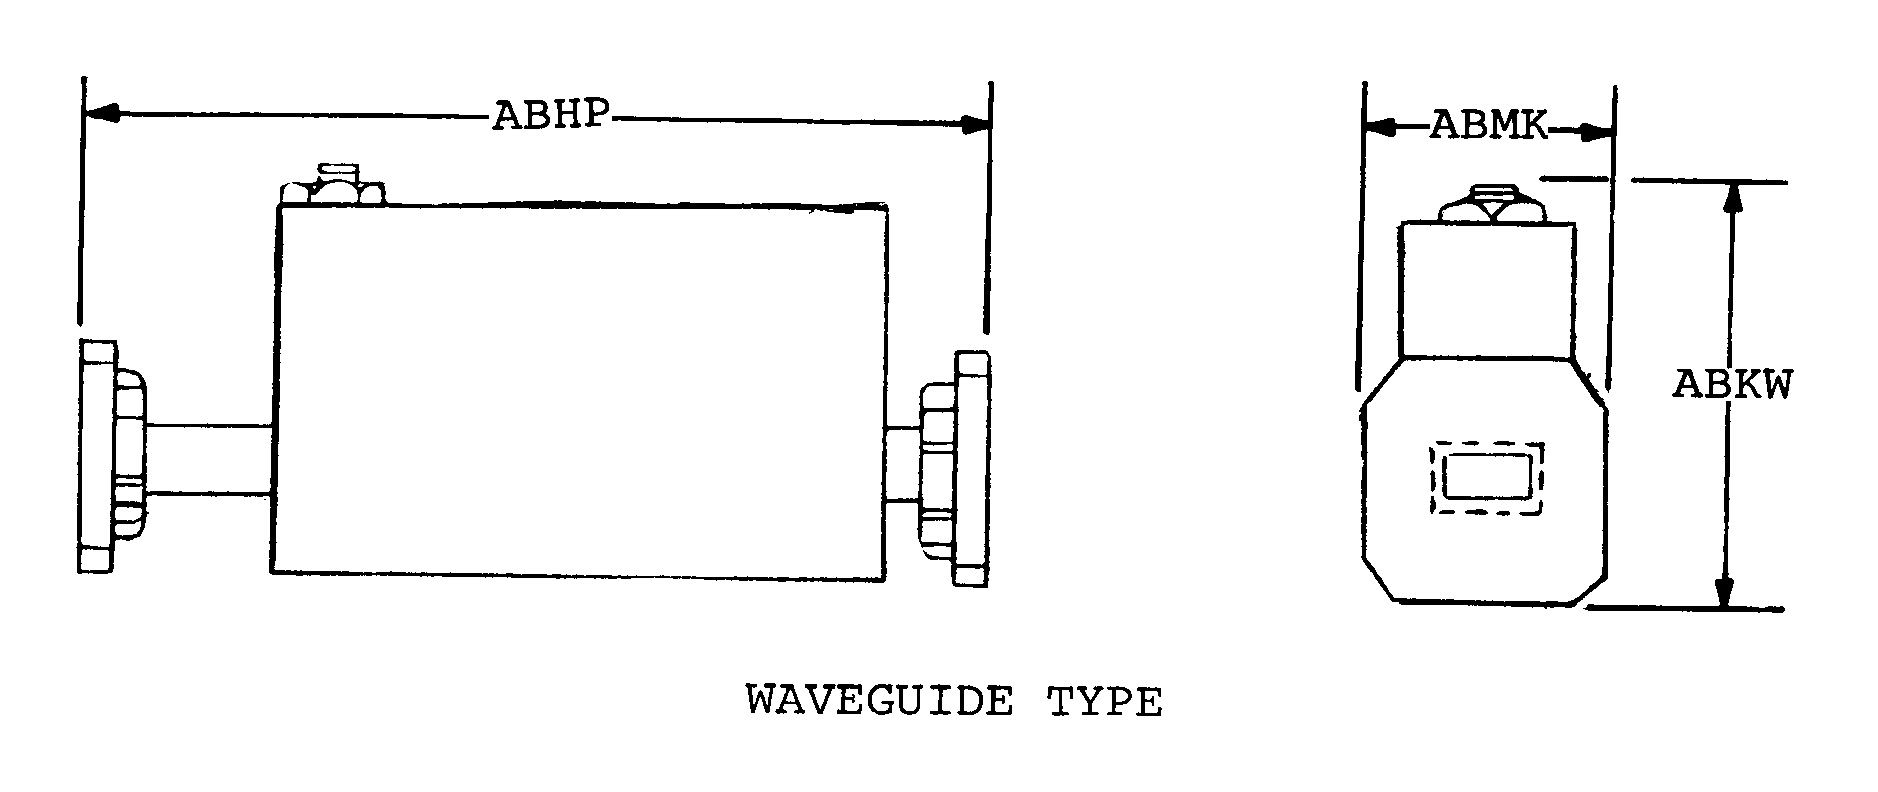 WAVEGUIDE TYPE style nsn 5985-00-431-8276